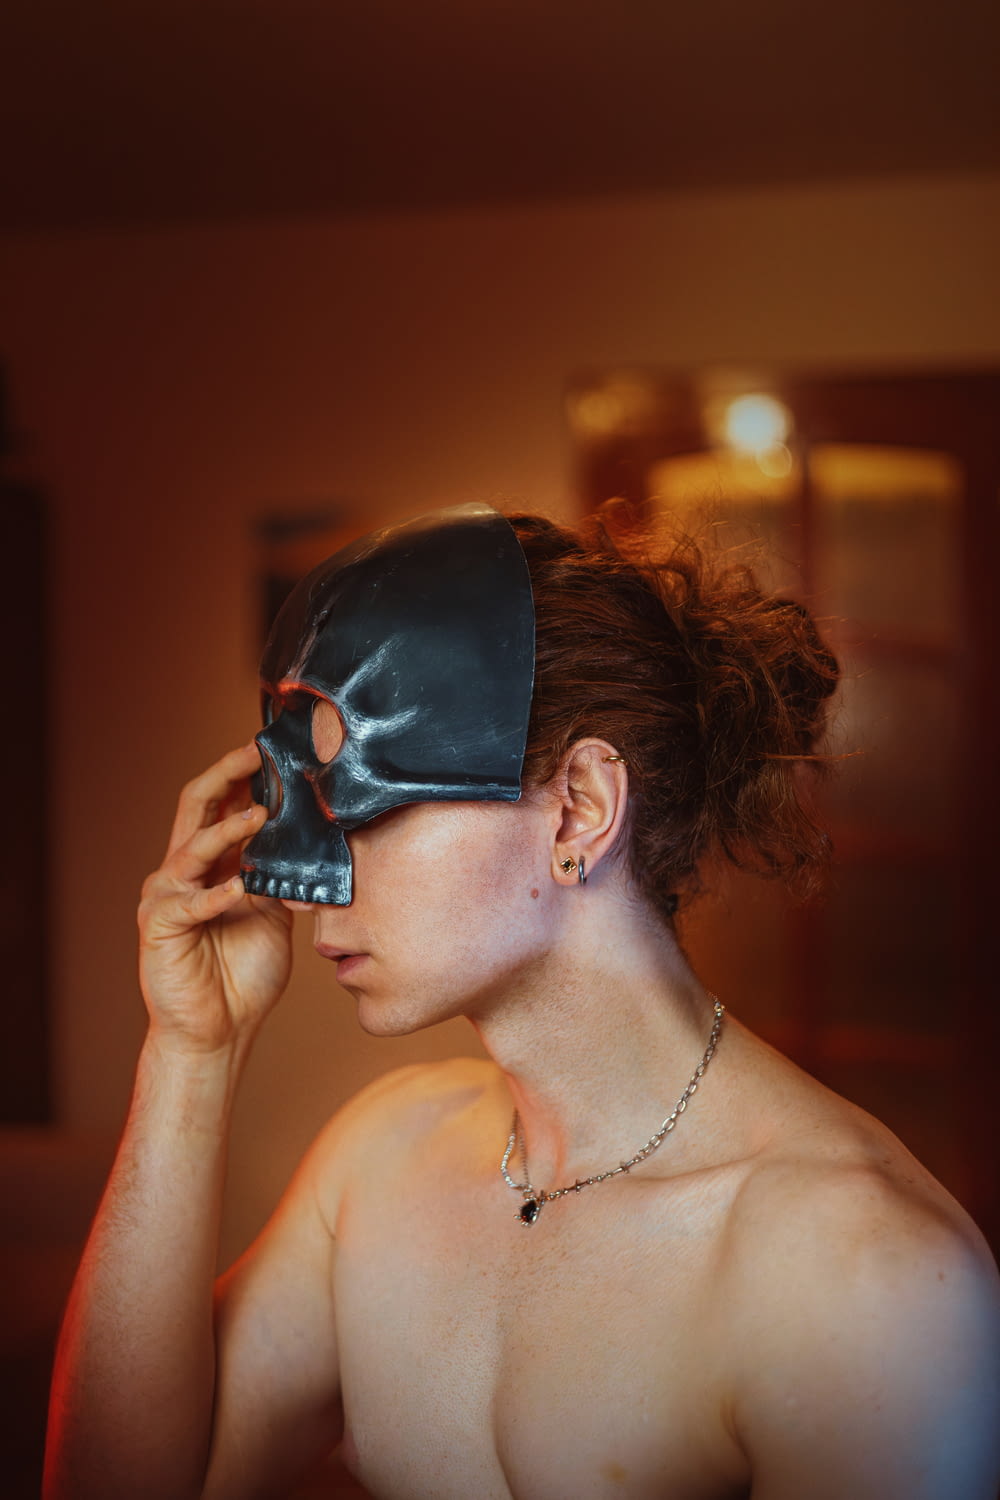 a shirtless woman wearing a leather mask